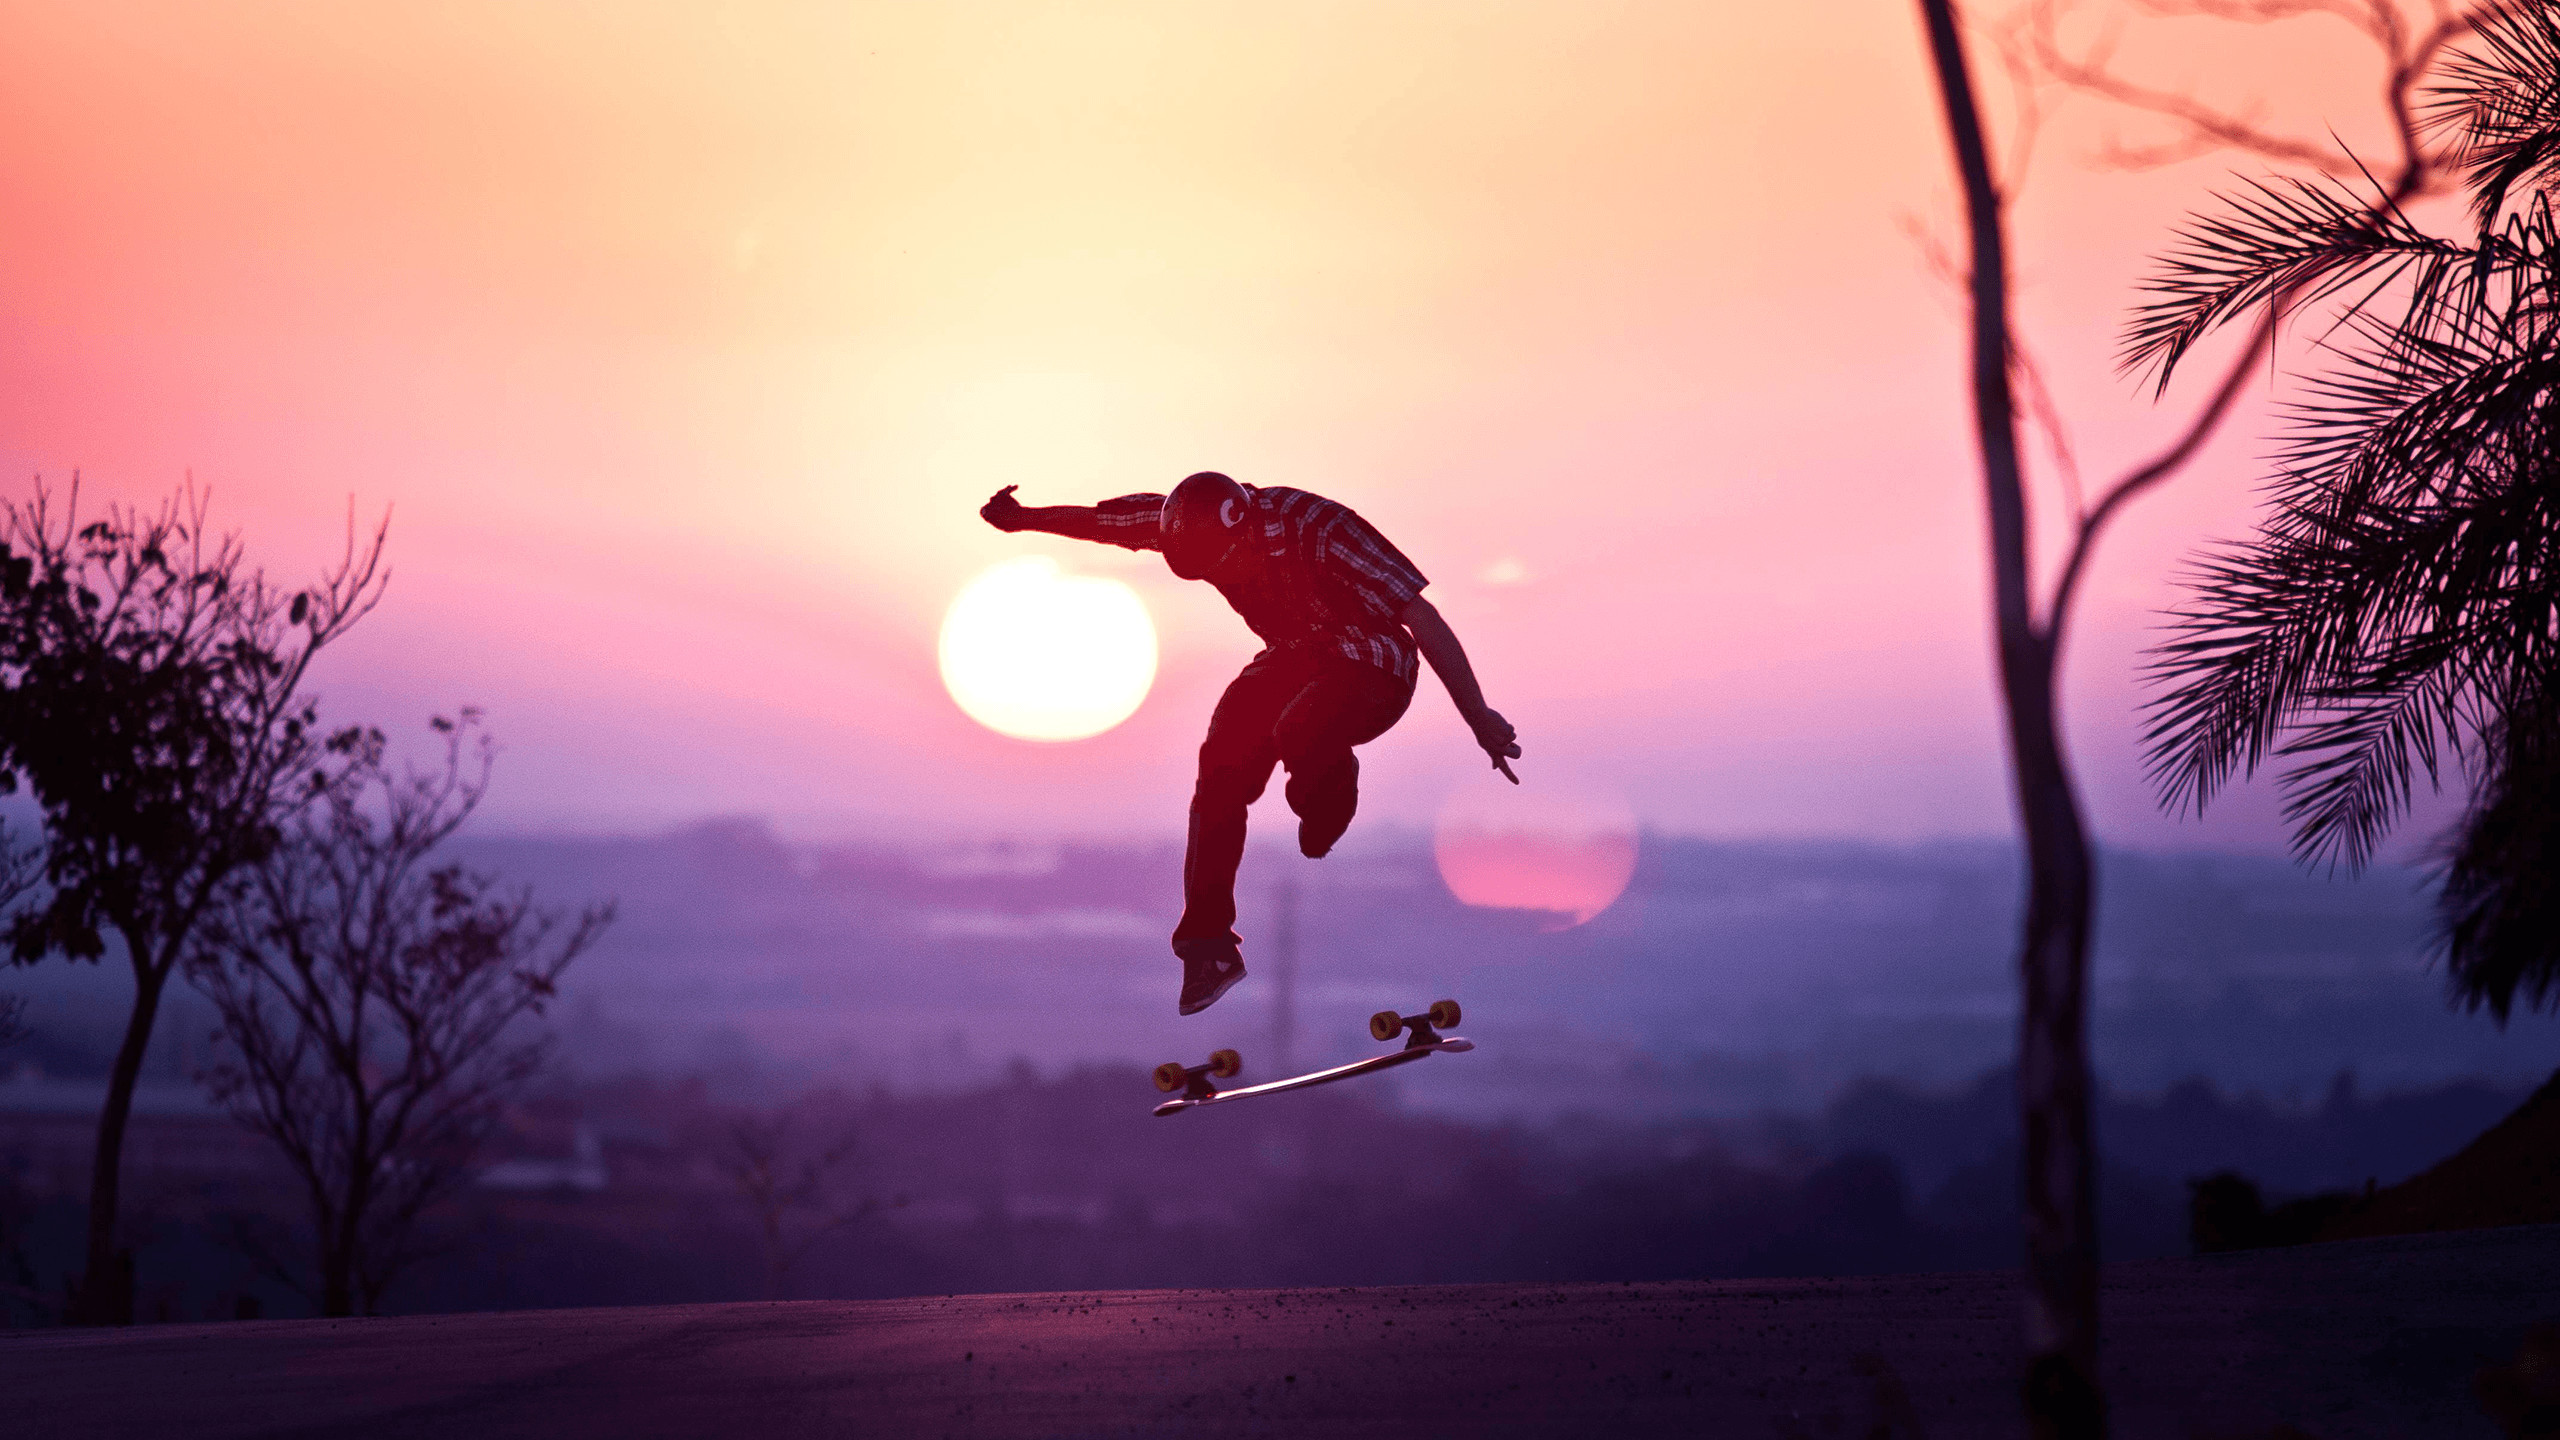 Wallpaper of Skateboard (74+ pictures)